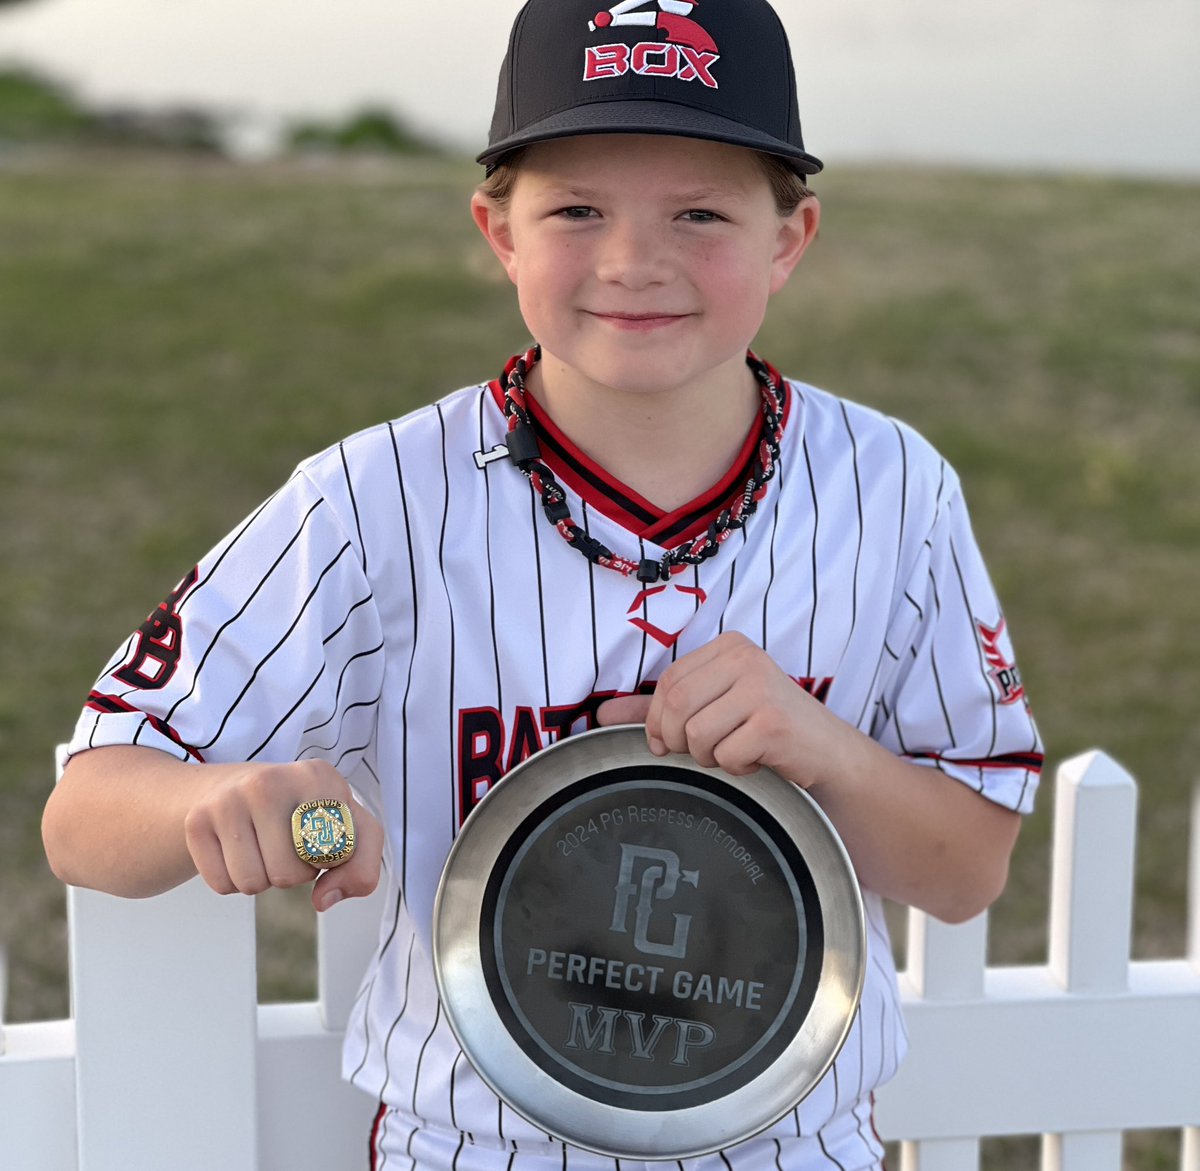 HUGE congrats to Batters Box 9U Black on going 5-0 and winning the Perfect Game Respess Memorial Tournament at Snowden! 🏆 #champs #reptheBox 🏅 Shout-out to Hailey Sumner for being named overall tournament MVP! #BoxGirl @SnowdenBaseball @PGYouthBB